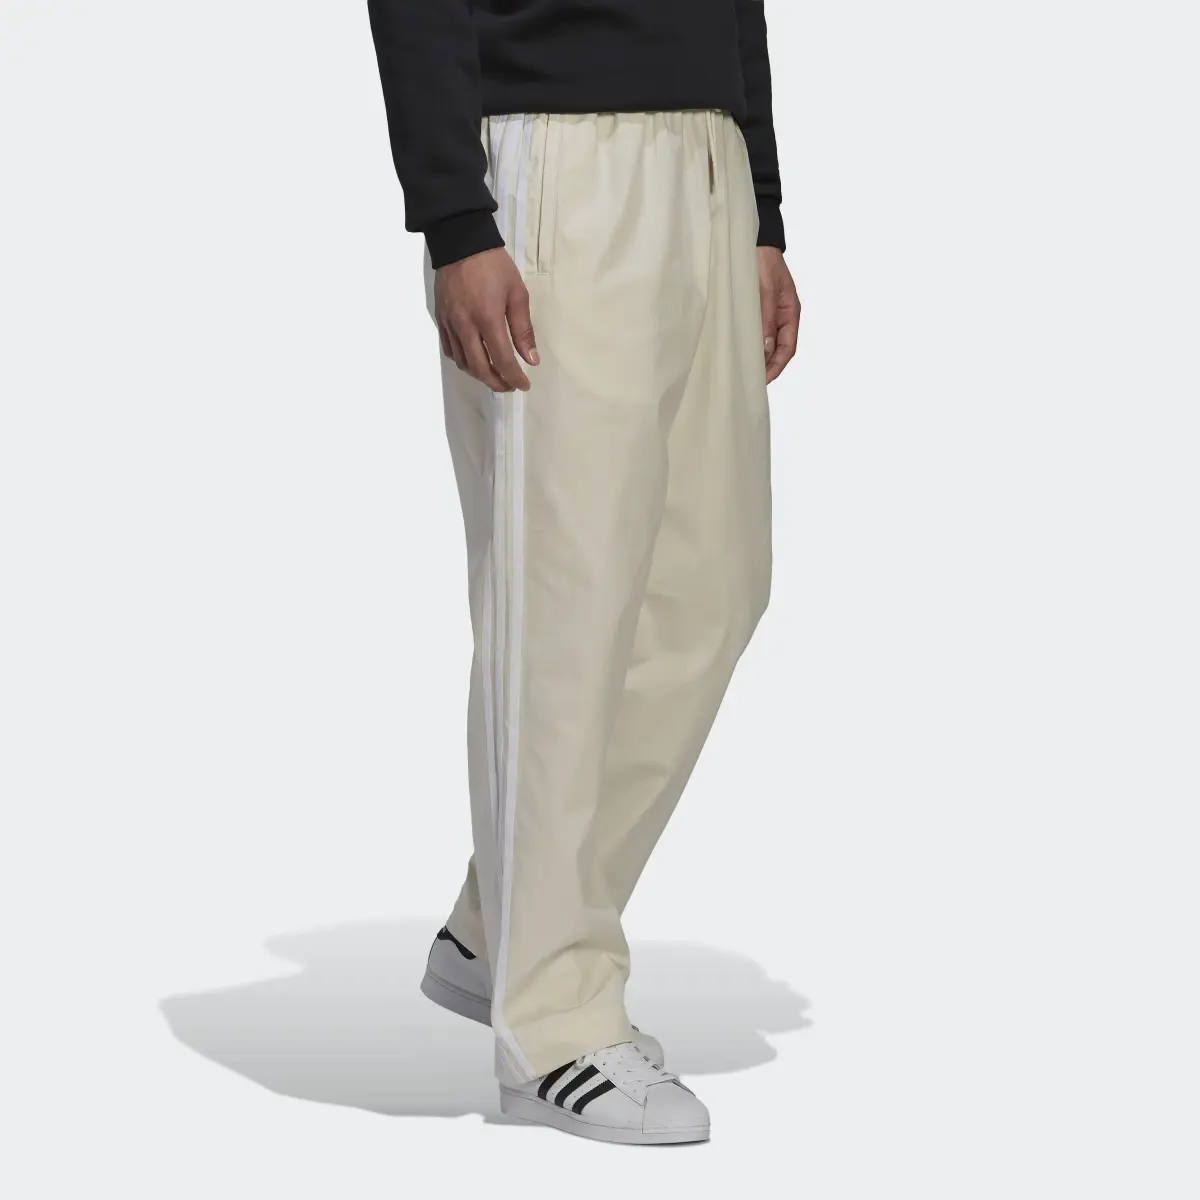 Adidas Work Trousers. 3